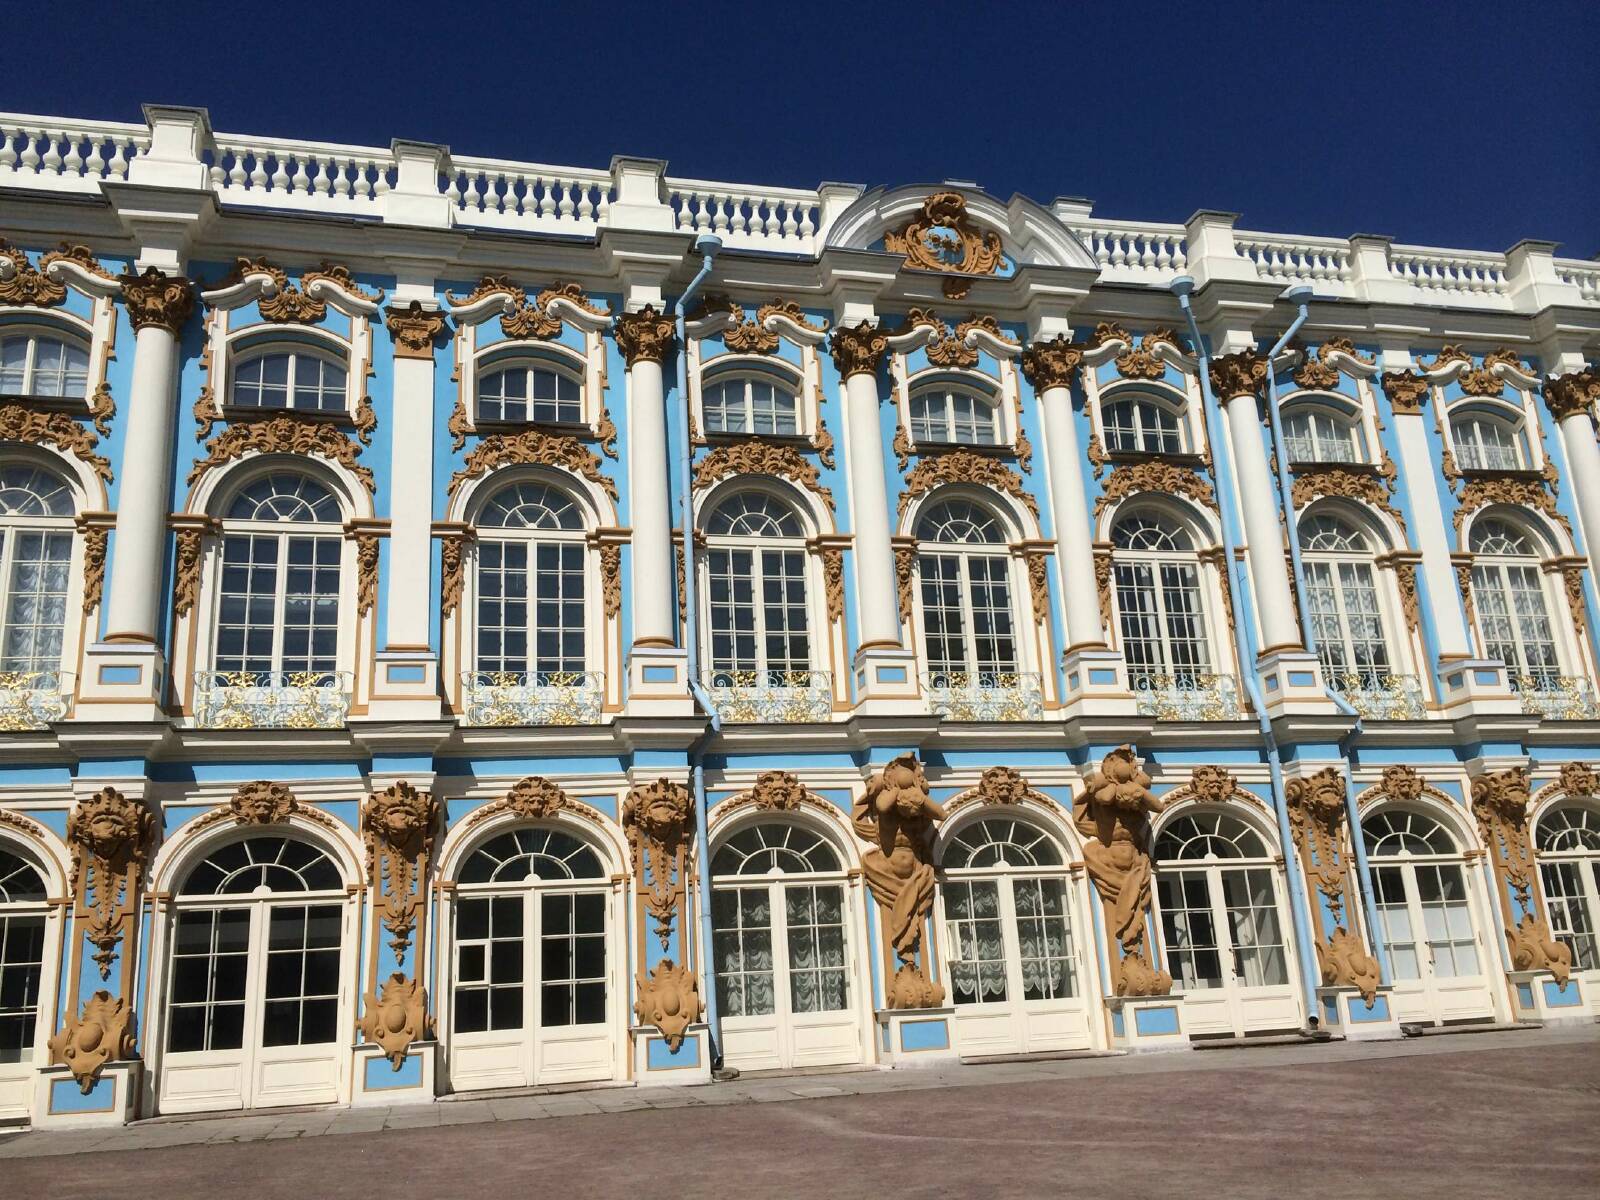 Catherine Palace | Compare Tours from Different Websites and See the Imperial Palace and Amber Room